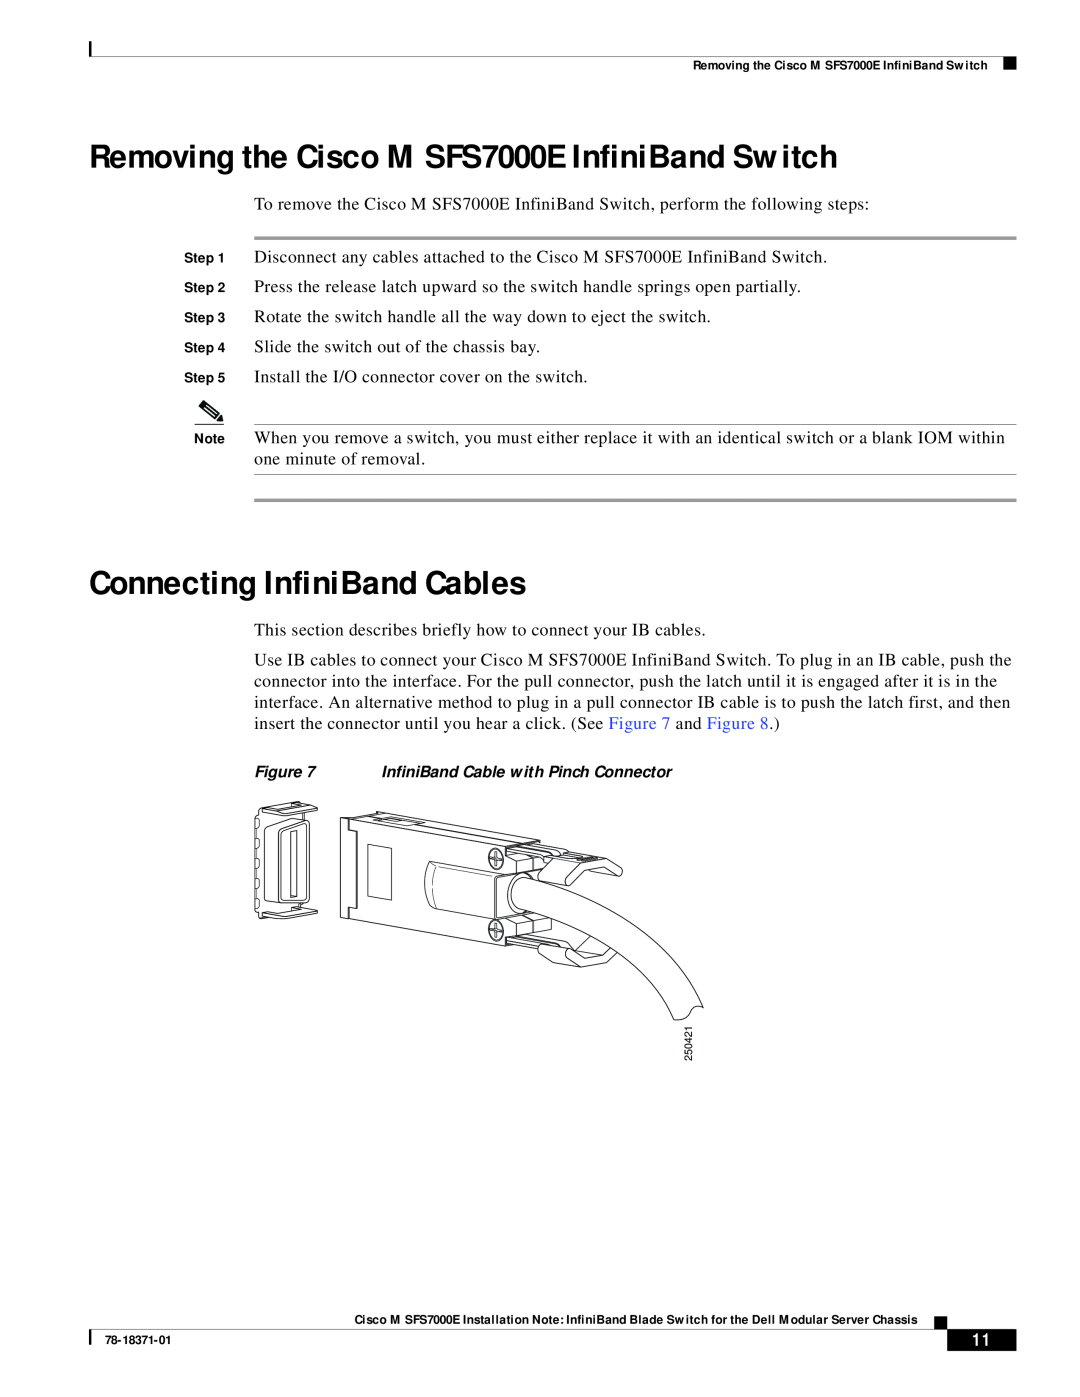 Cisco Systems specifications Removing the Cisco M SFS7000E InfiniBand Switch, Connecting InfiniBand Cables 